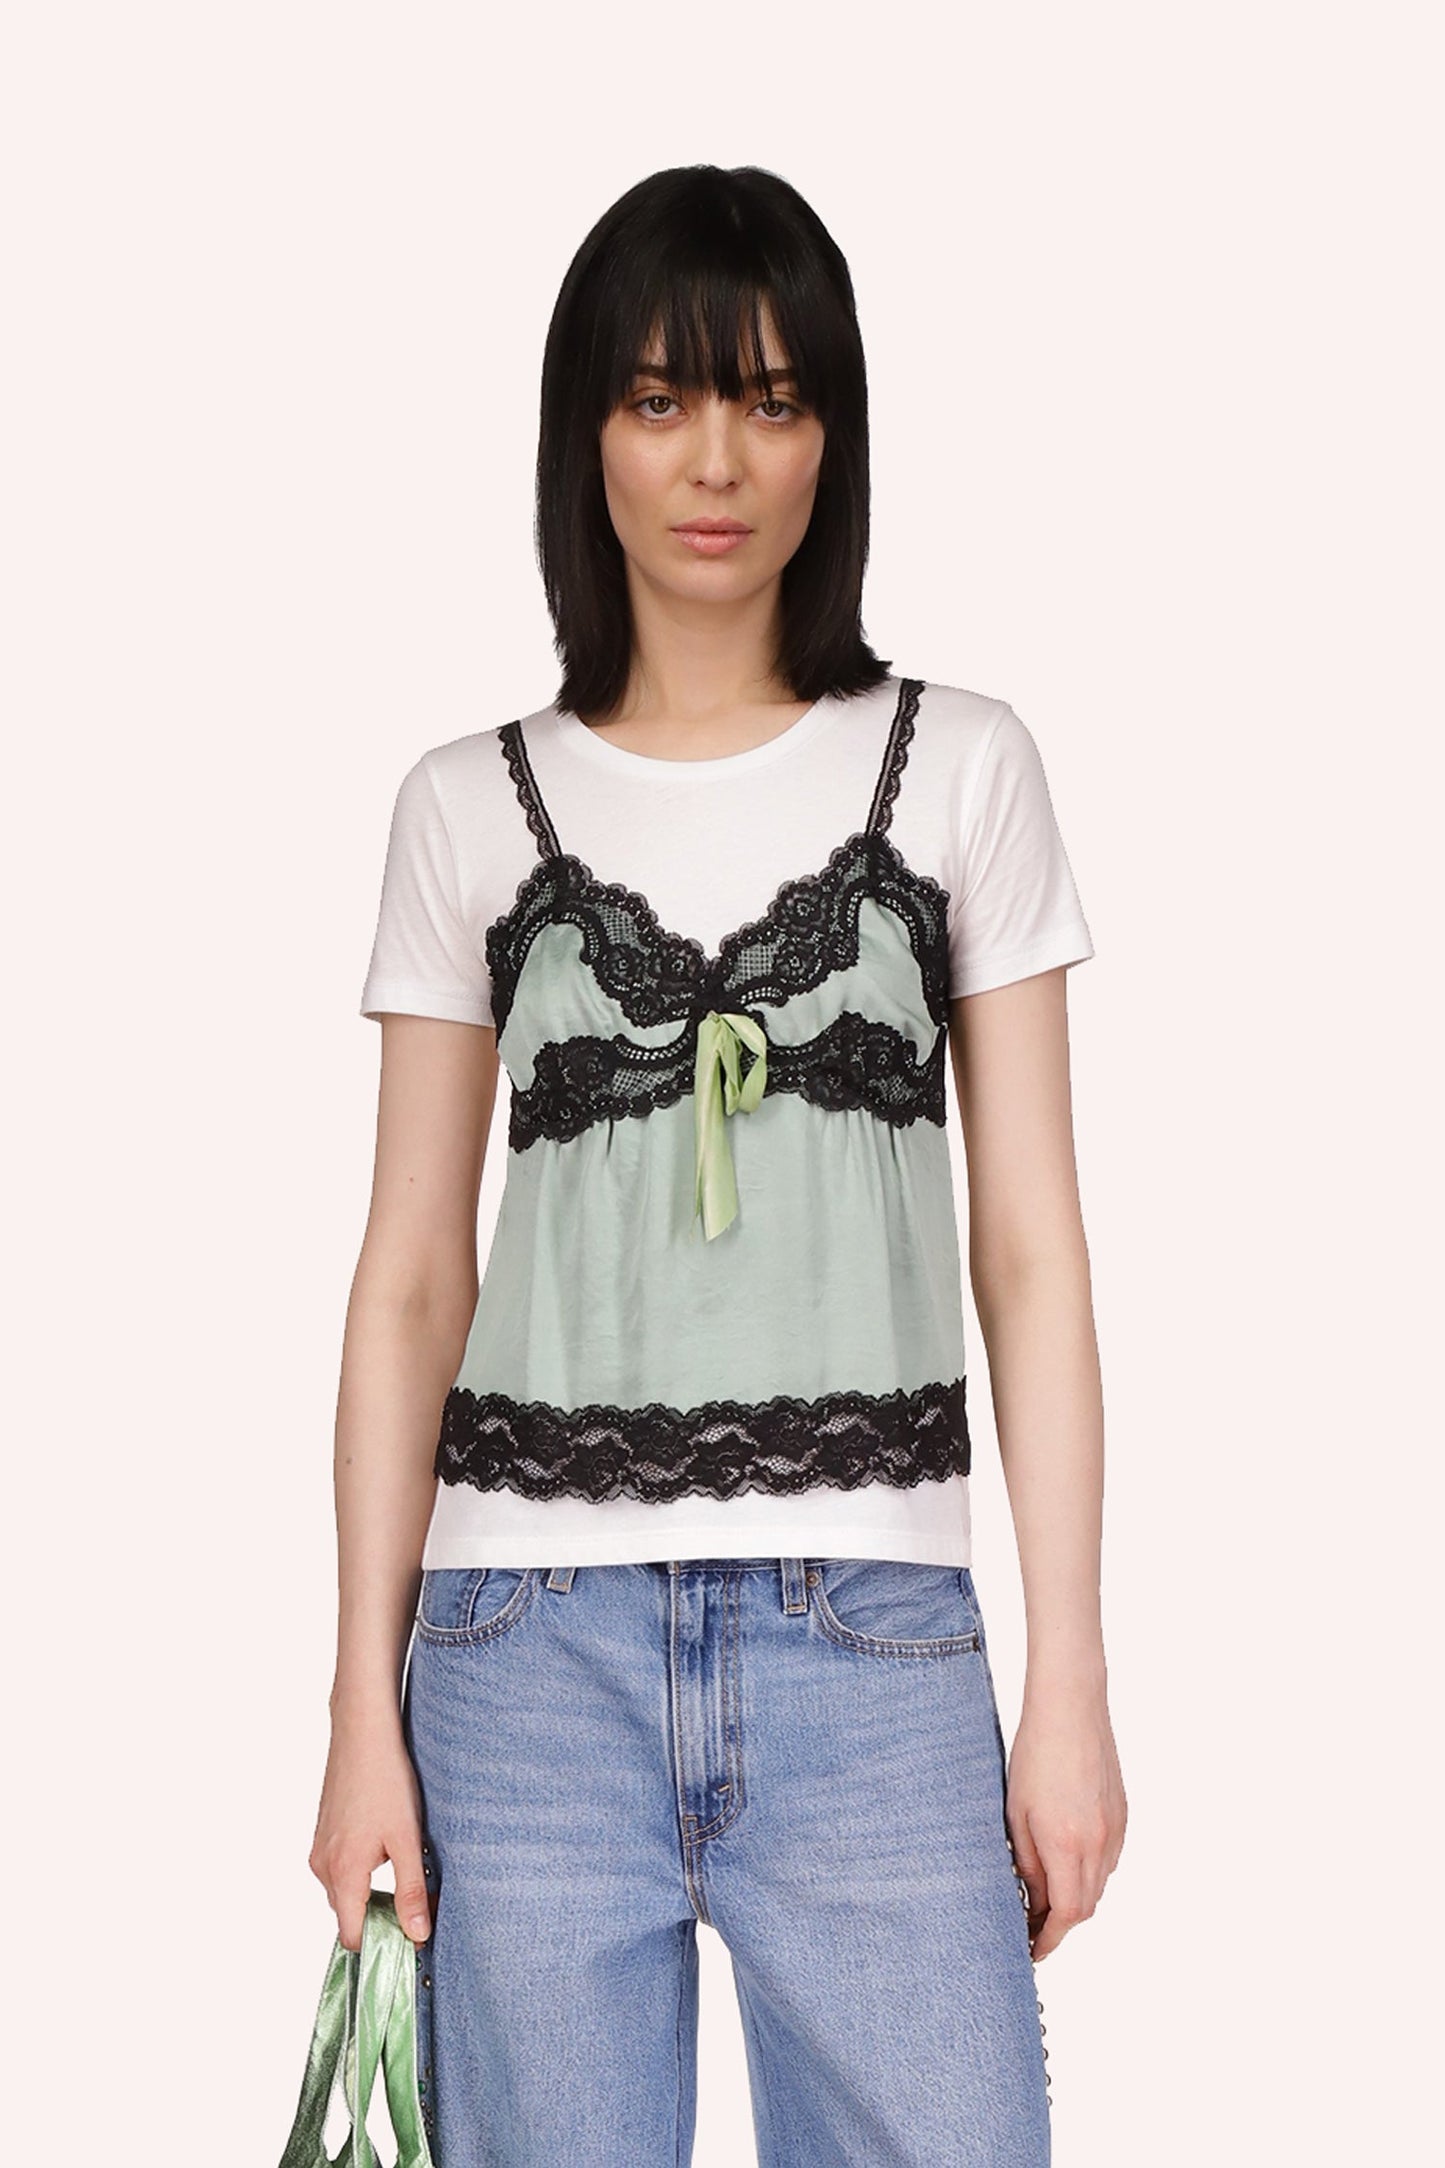 Sleeveless tee, backless, peppermint, black hems lace, 2-straps, V-collar, pink ribbon middle chest